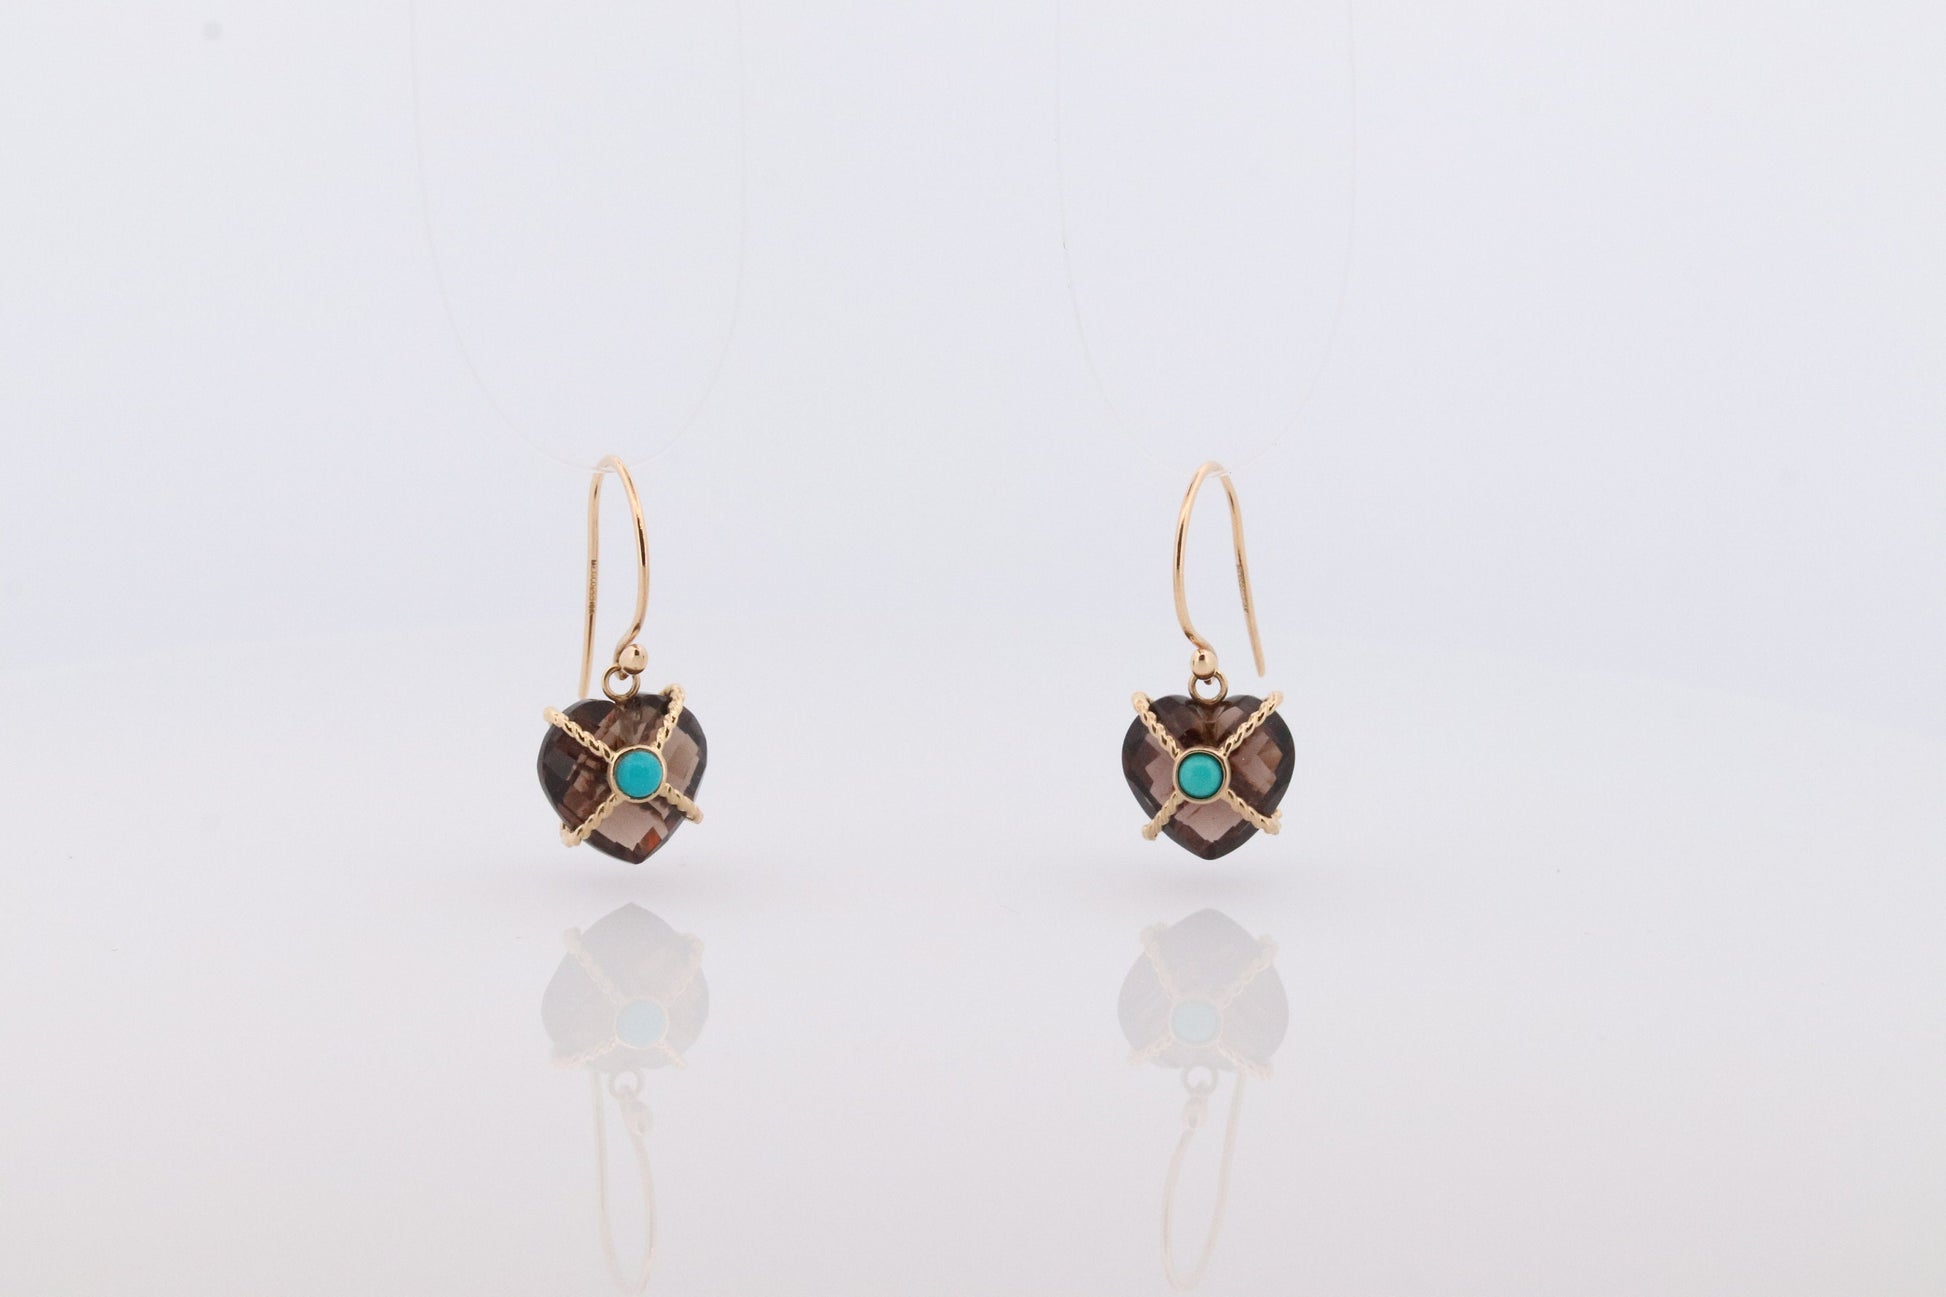 18k Heart Earrings. Smoky Quartz Carved Heart Dangle Earrings. Turquoise Cabochon with 18k Bound Large Heart. st(92)